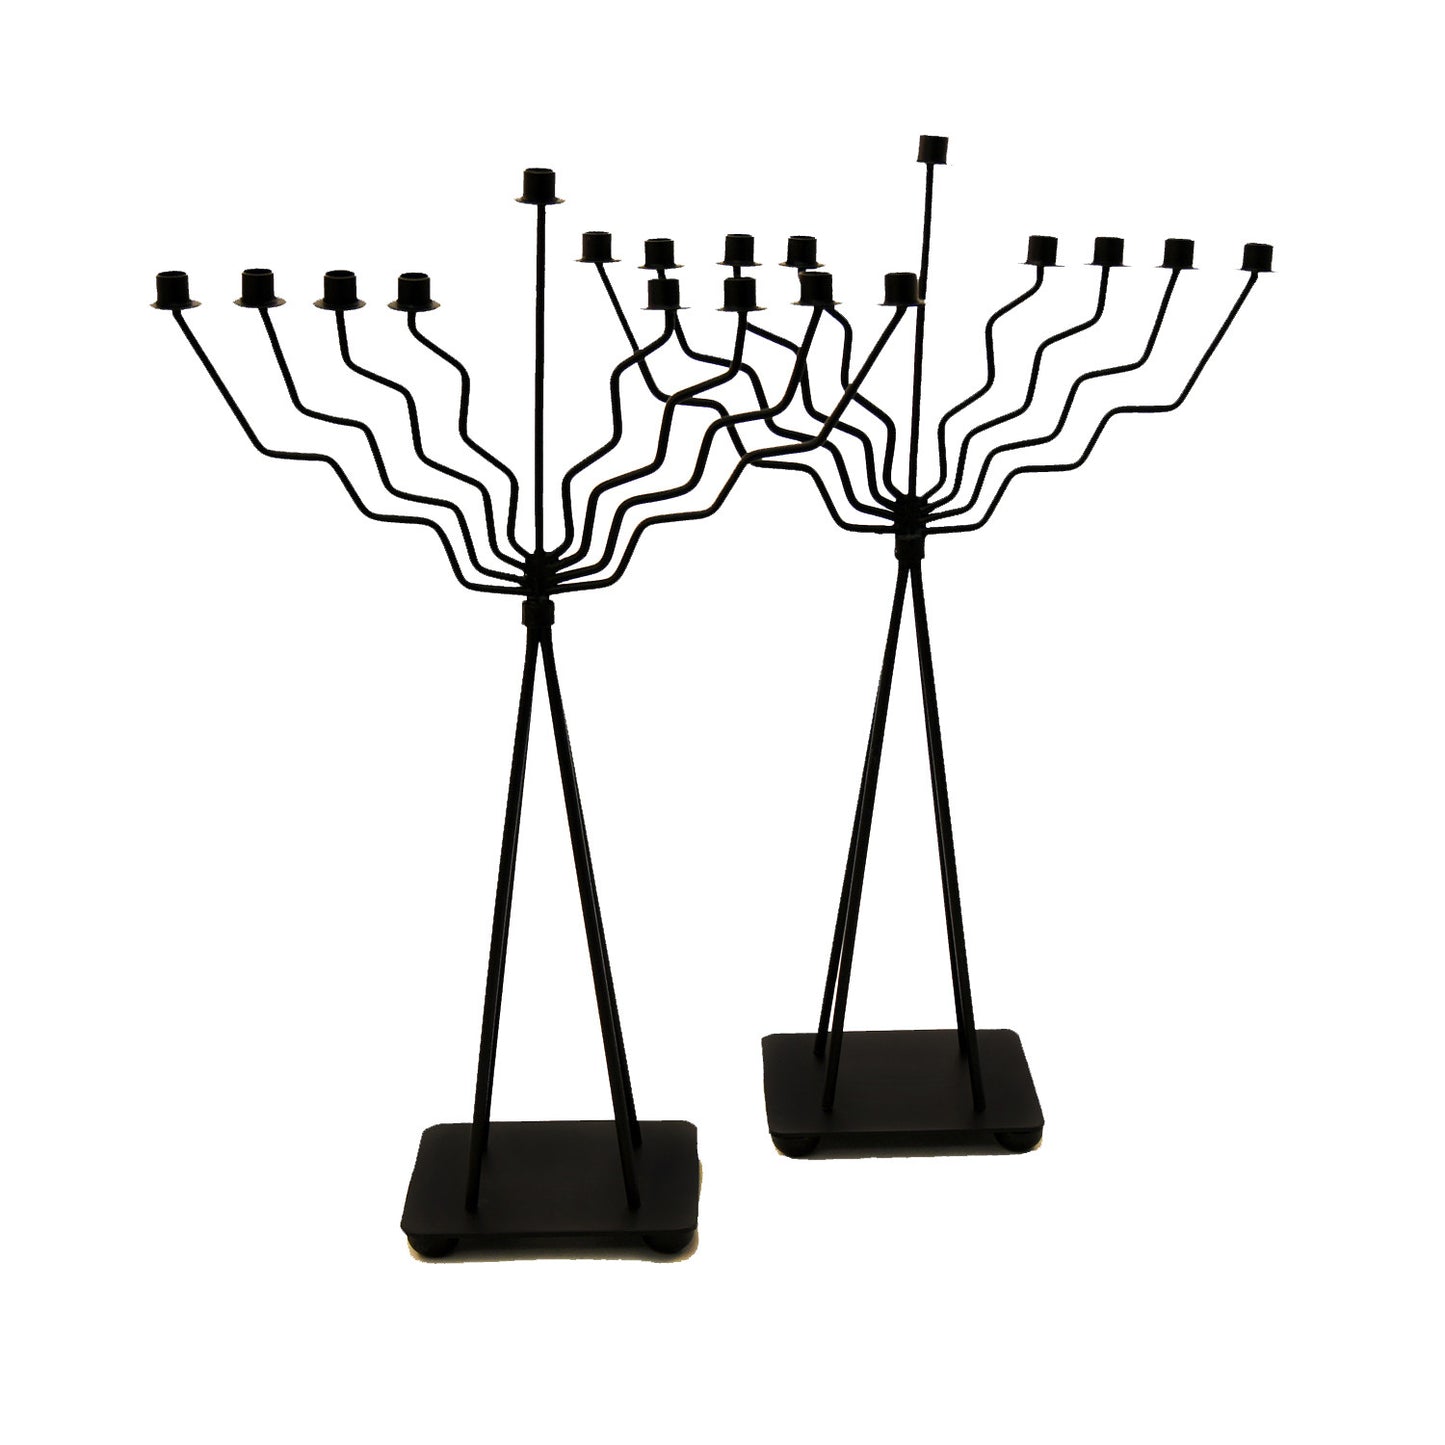 GiftBay 16003 Menorah 9-Branch Black Finish Set of 2 Contemporary Look 20" High to Celebrate Hanukkah and Gifts, An Excellent Unbeatable Value